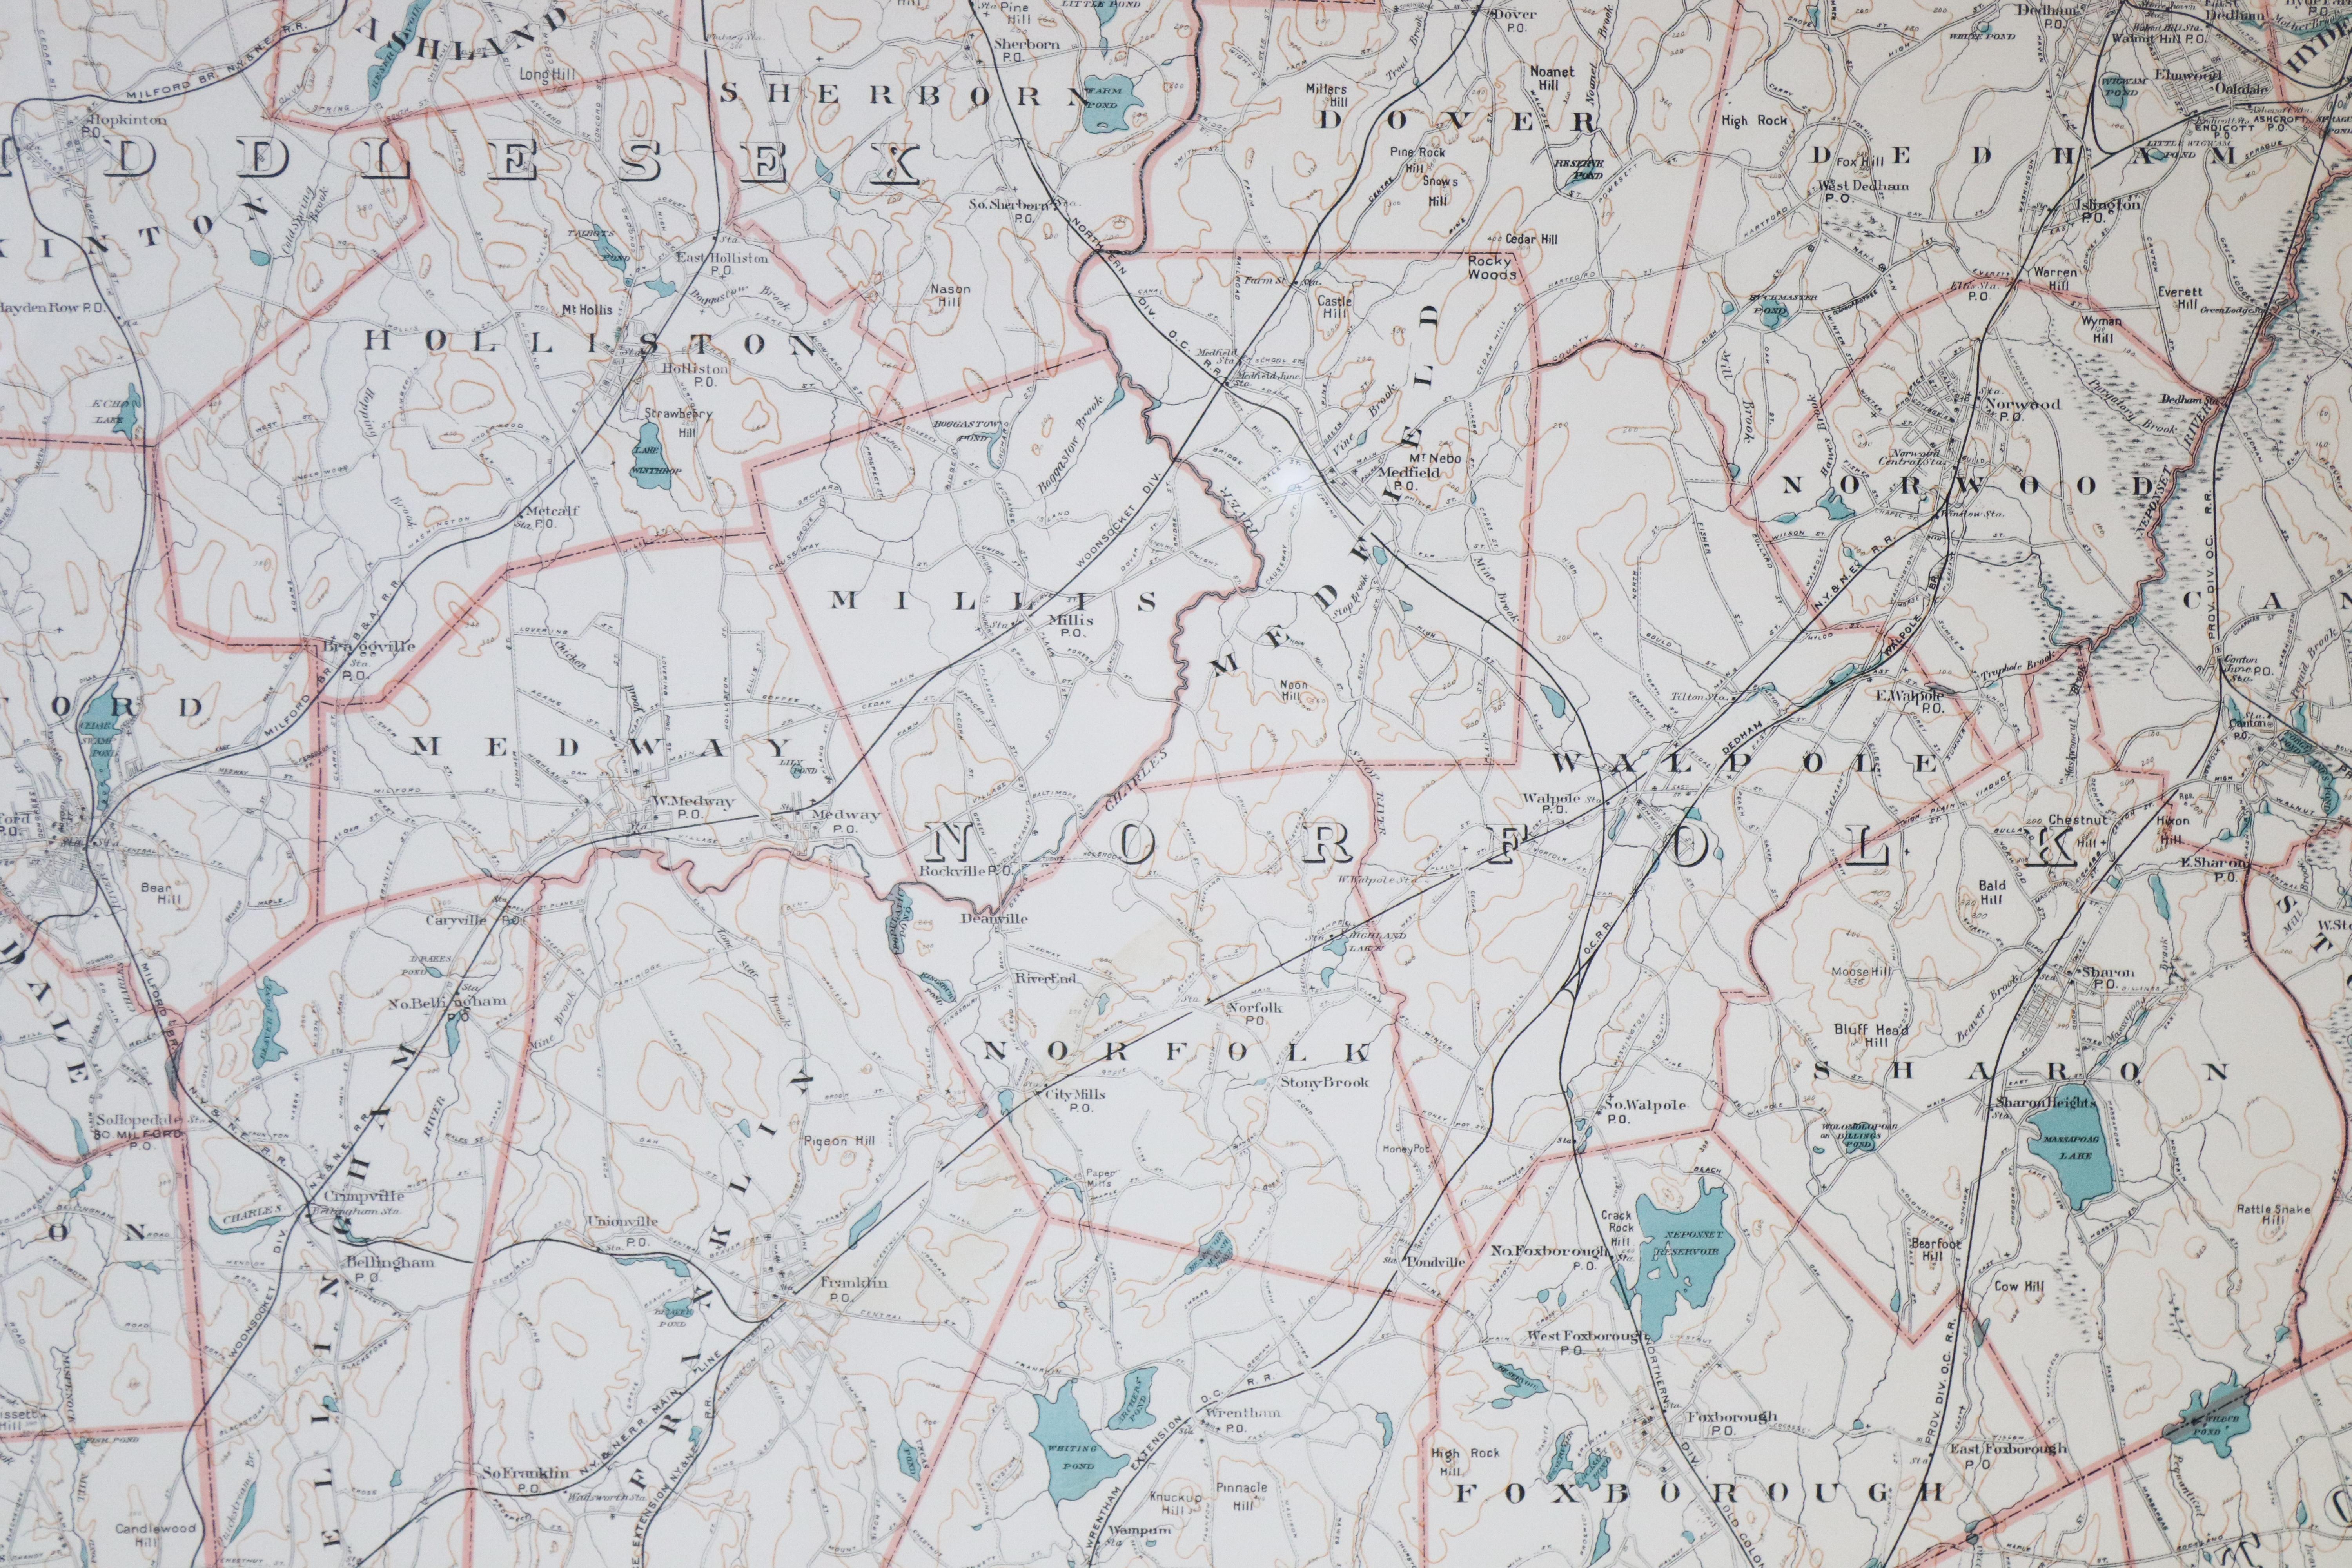 1891 map of Norfolk county Massachusetts including the towns of Wrentham, Franklin, Medfield, Sherborn, Norwood etc., measures: 23 x 31.